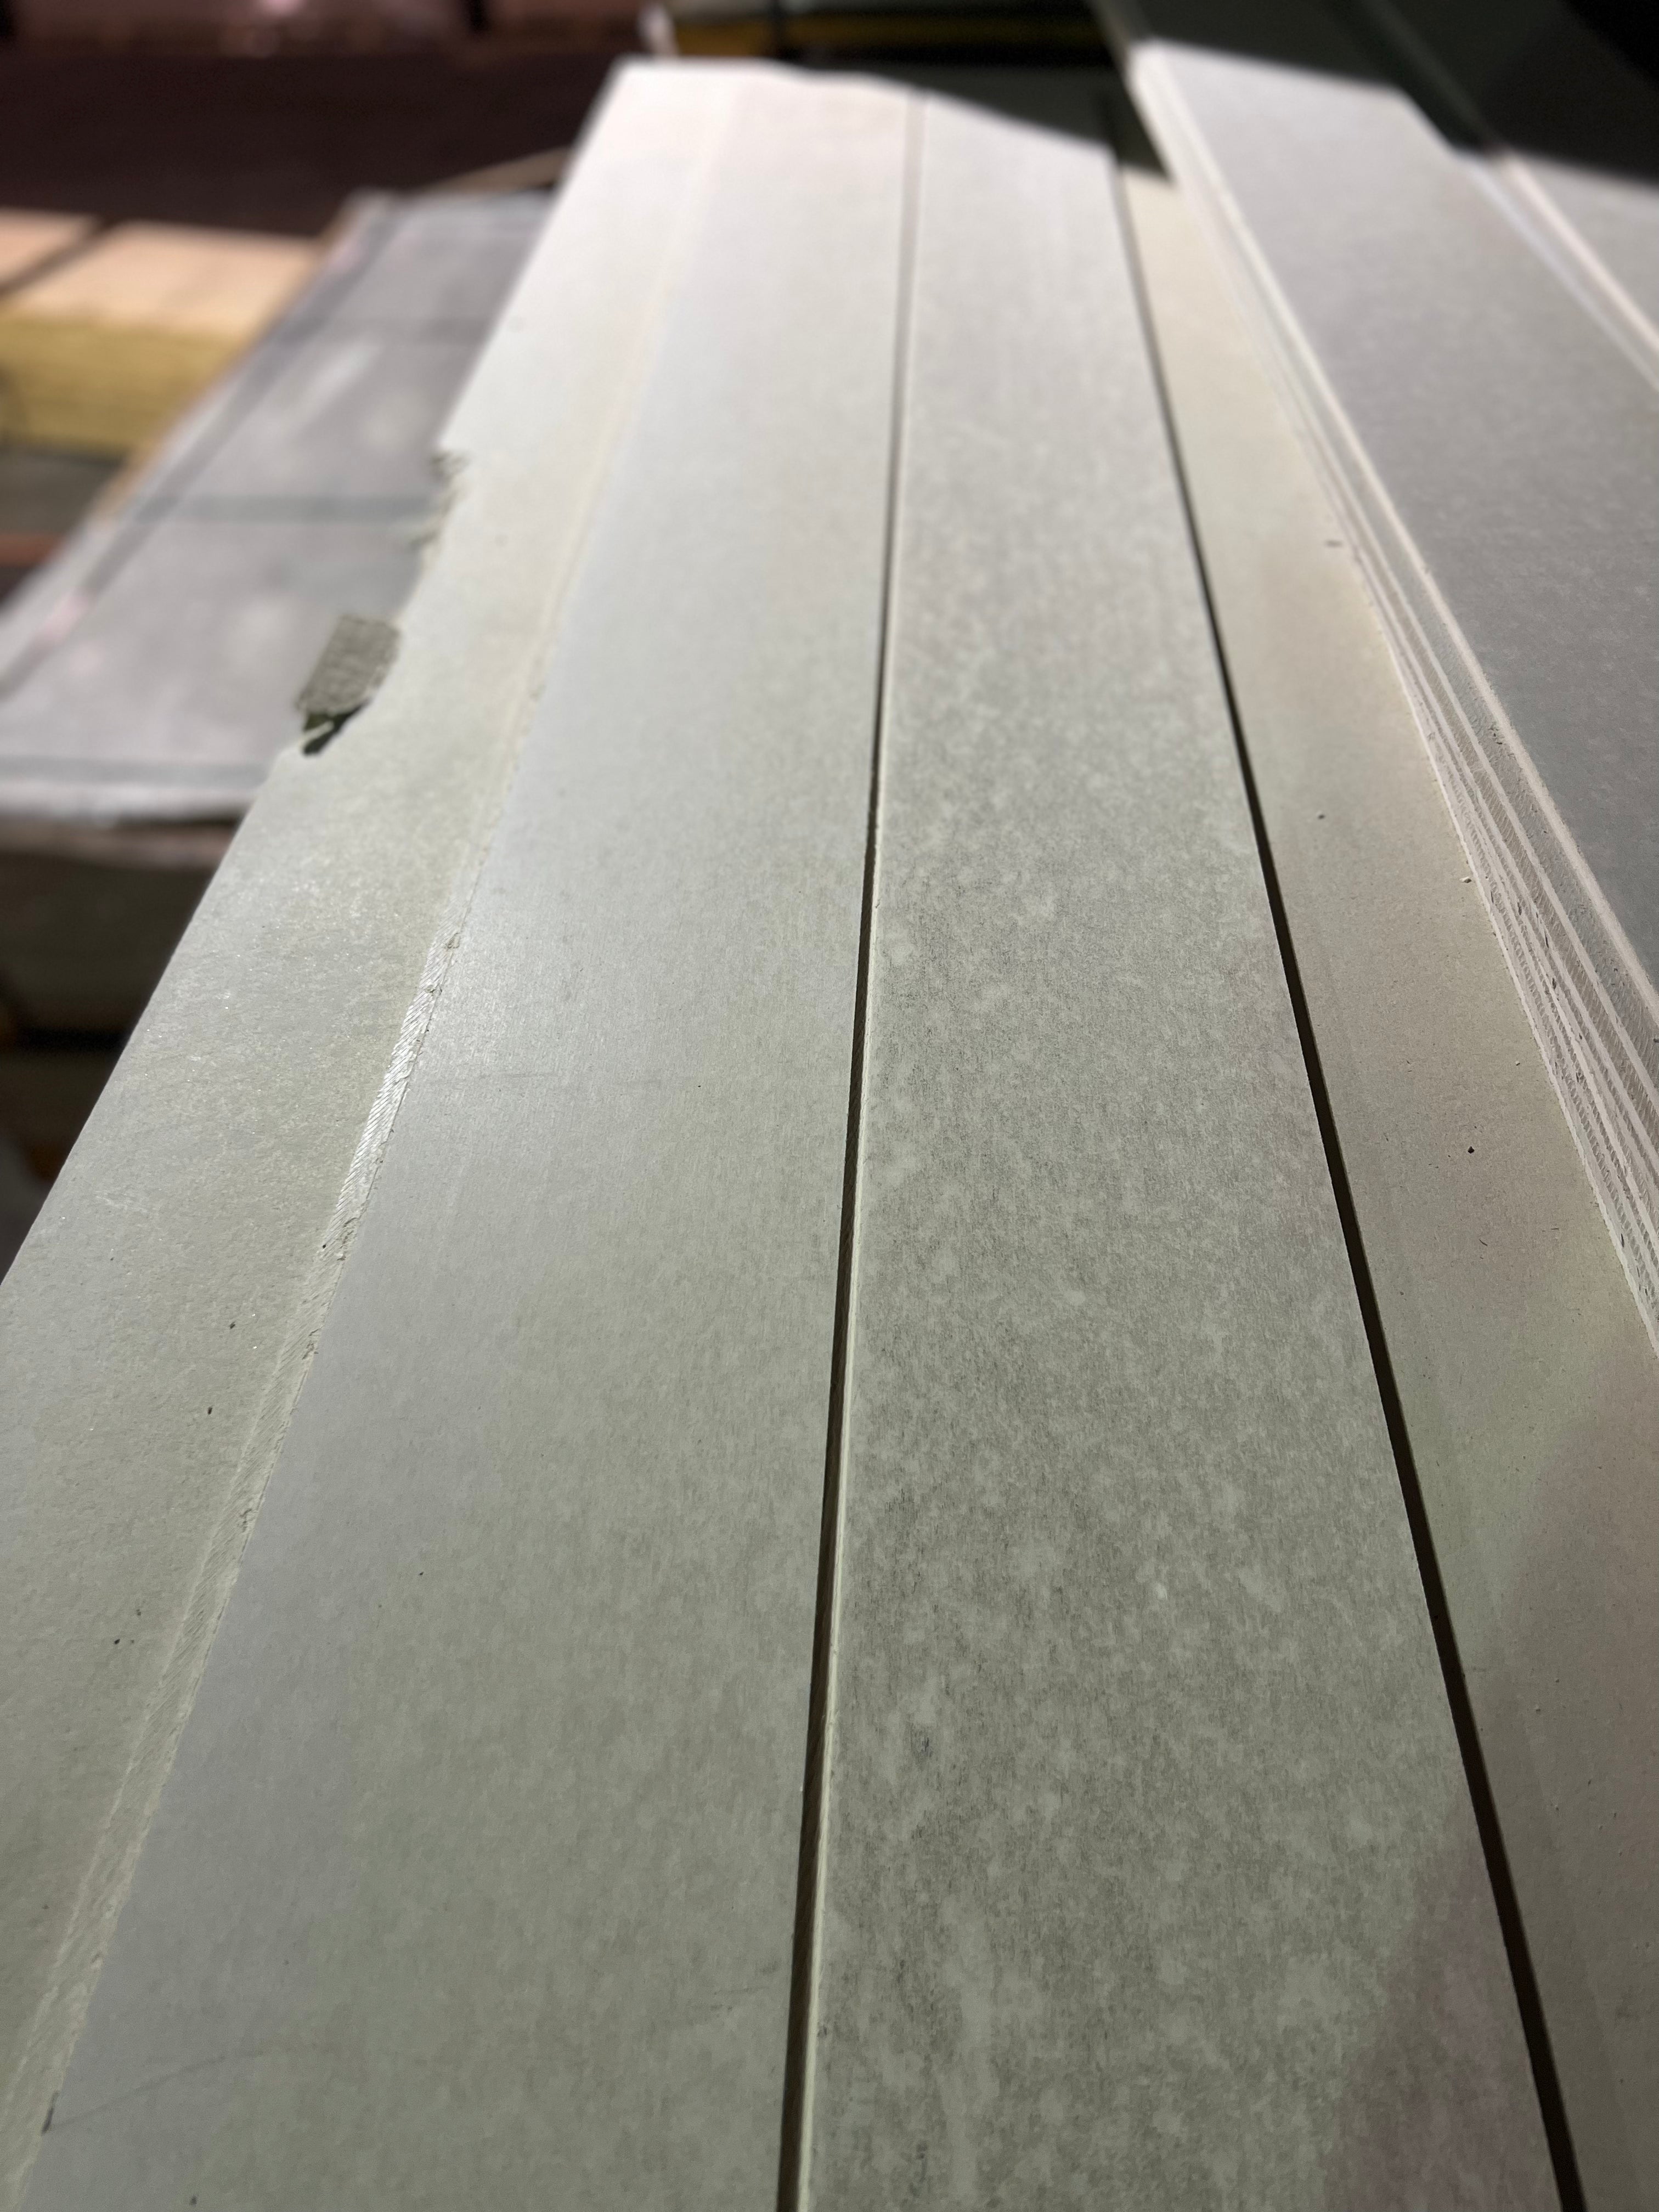 Smooth Weatherboard Fibre Cement Sheets - Surplus Traders Australia Buy Smooth Weatherboard Fibre Cement Sheets for only A$20.00 at Surplus Traders Australia!